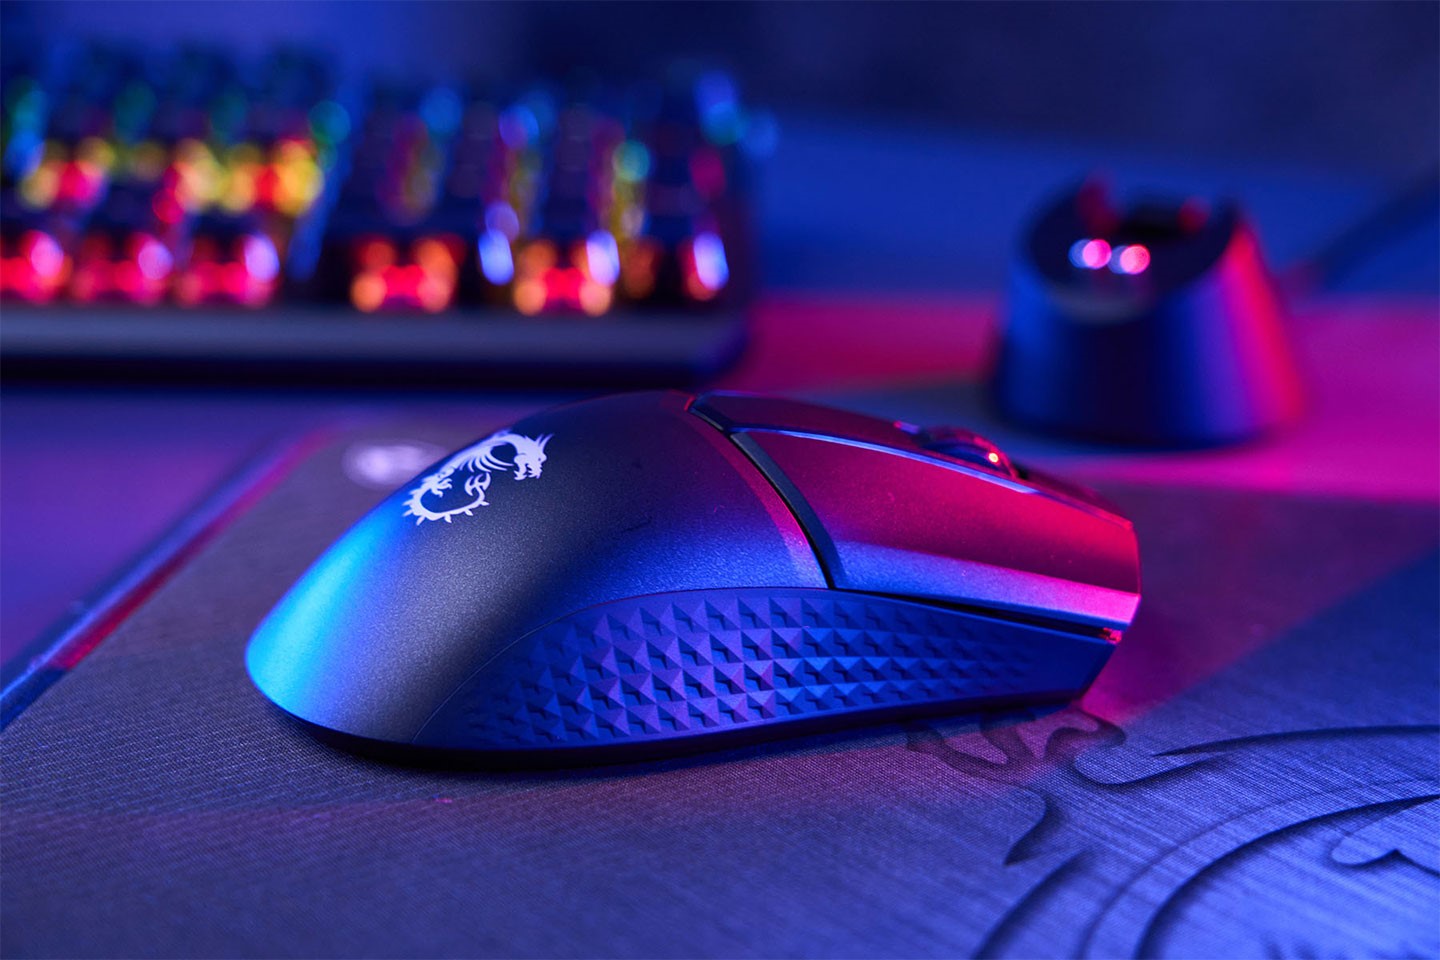 The right side of the mouse body also uses rhombic patterns to enhance the grip.